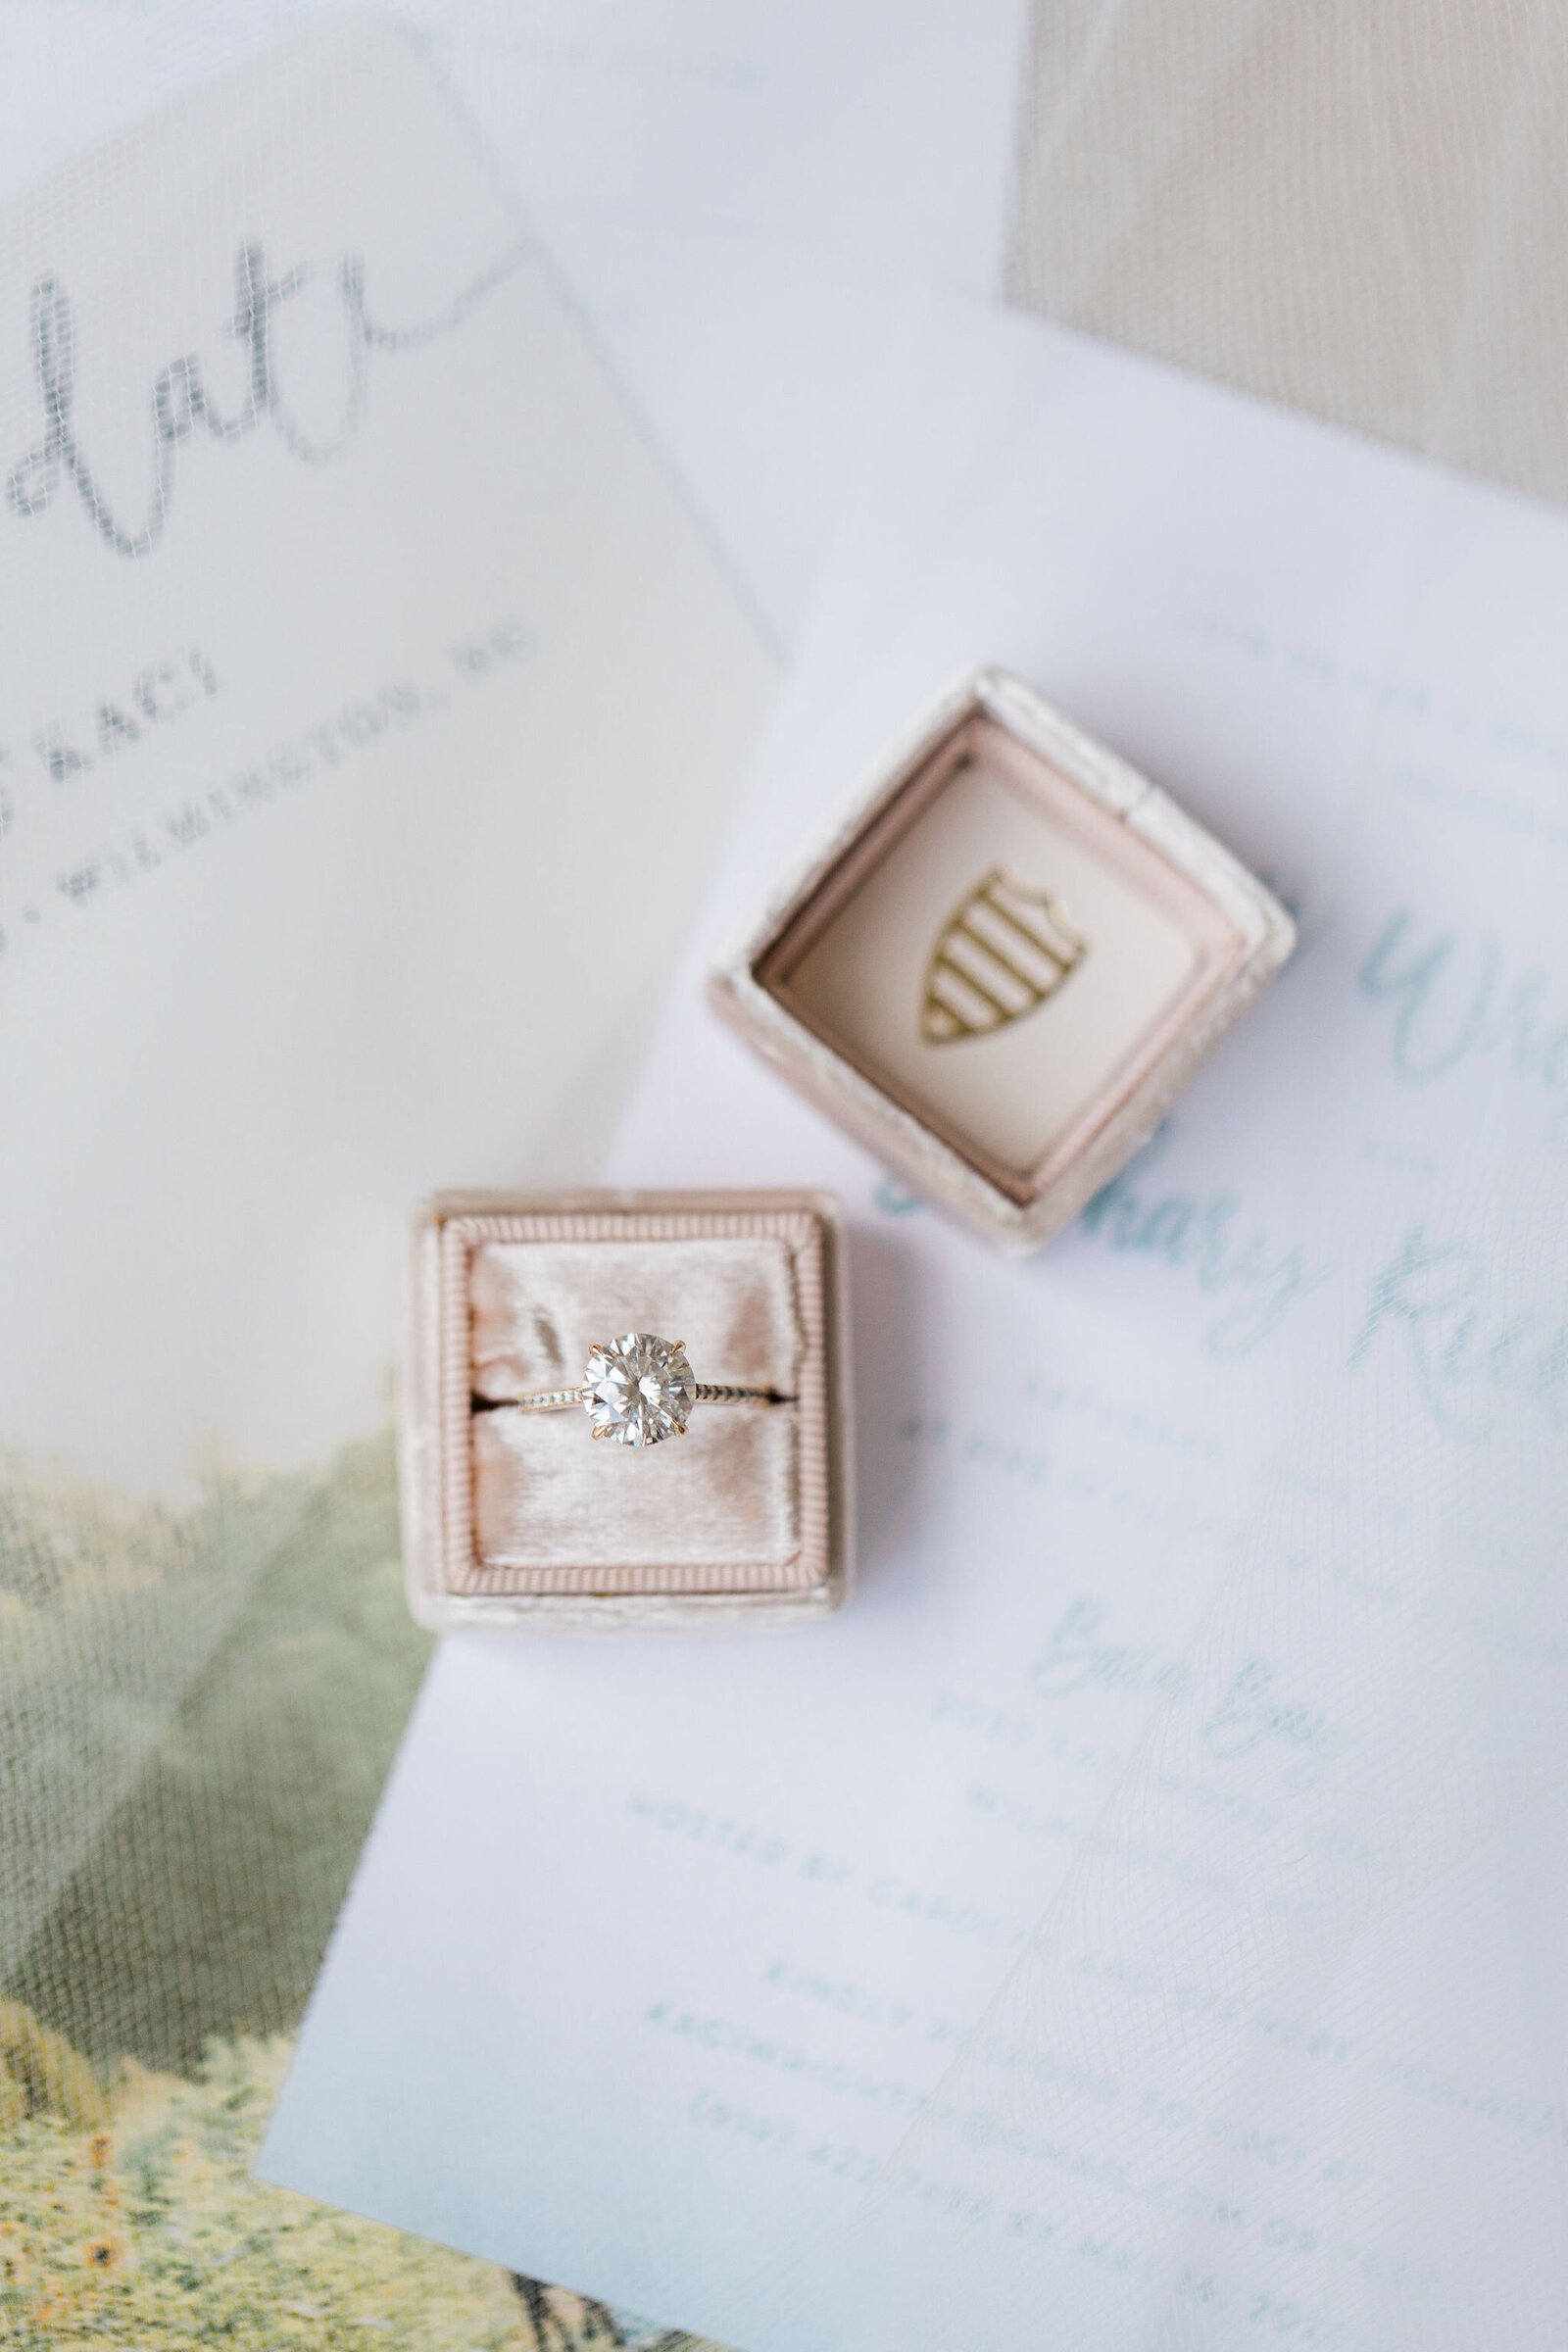 Wedding Ring Details on the Wedding Day | Wrightsville Manor, Wrightsville Beach NC | The Axtells Photo and Film